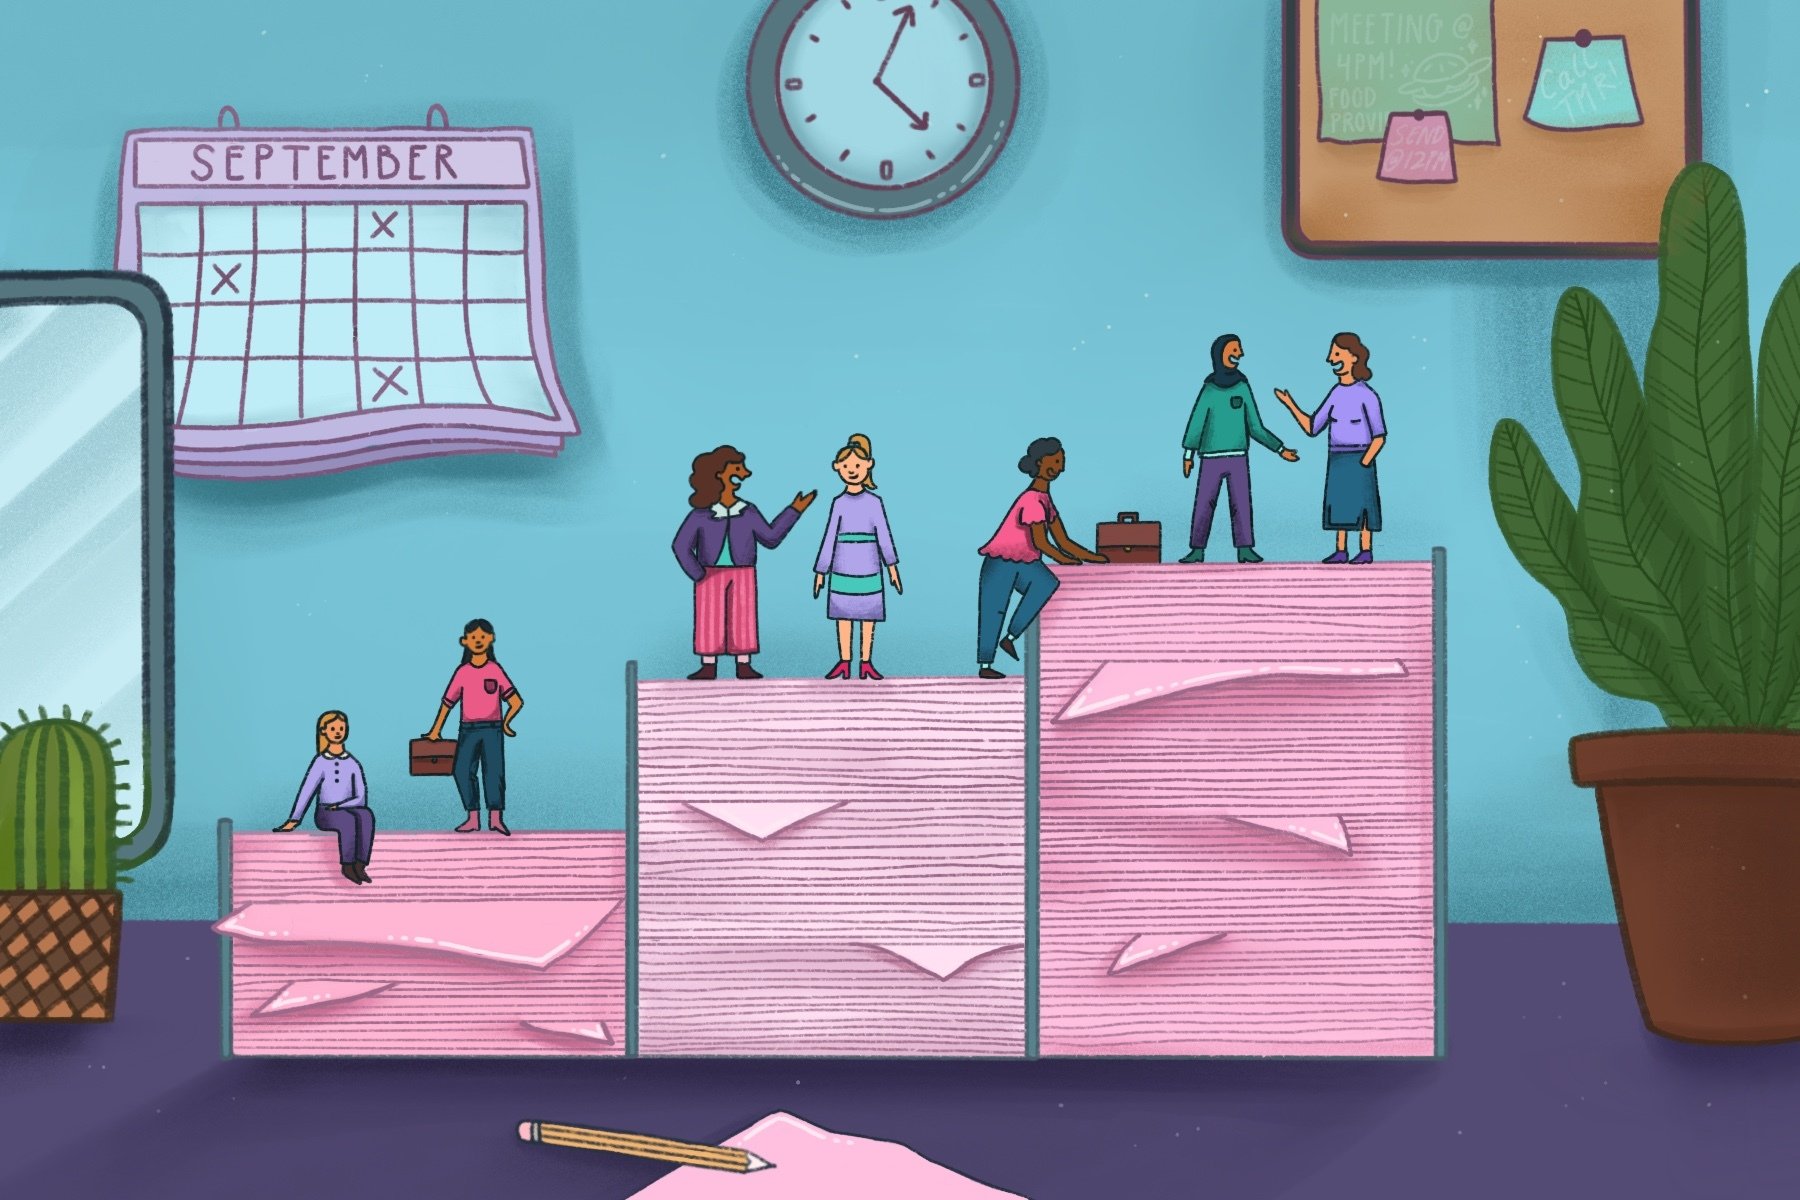 Illustration of working women standing and climbing stacks of paper of different heights. Office background with a calendar, a clock, a corkboard and a plant.